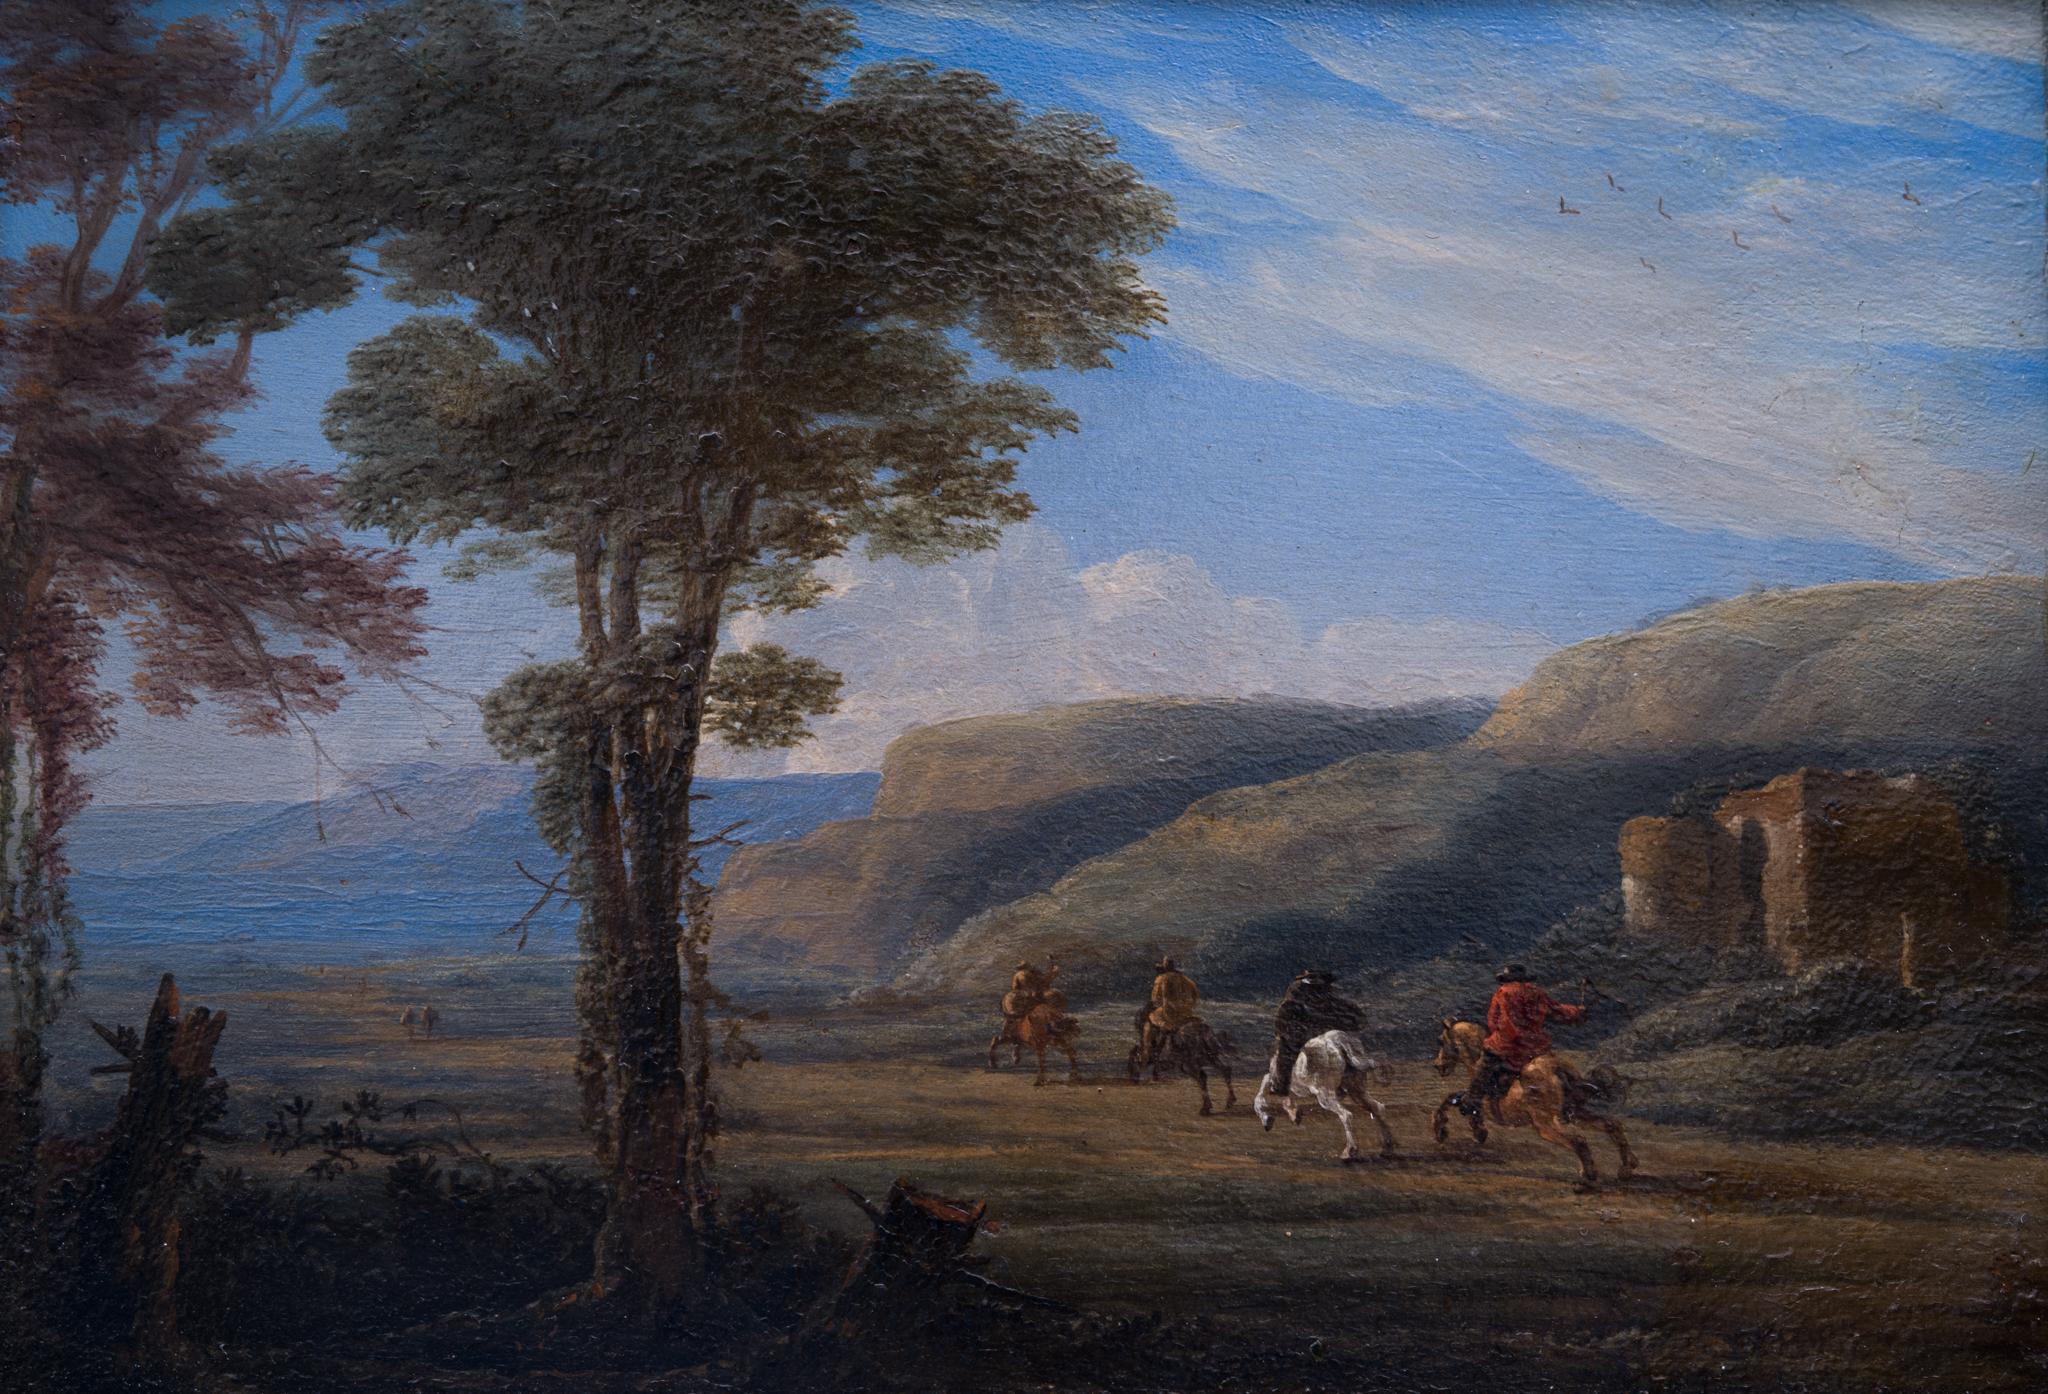 Unknown Landscape Painting - Southern Landscape with Riders: A Miniature Copper Masterpiece from the 1600s